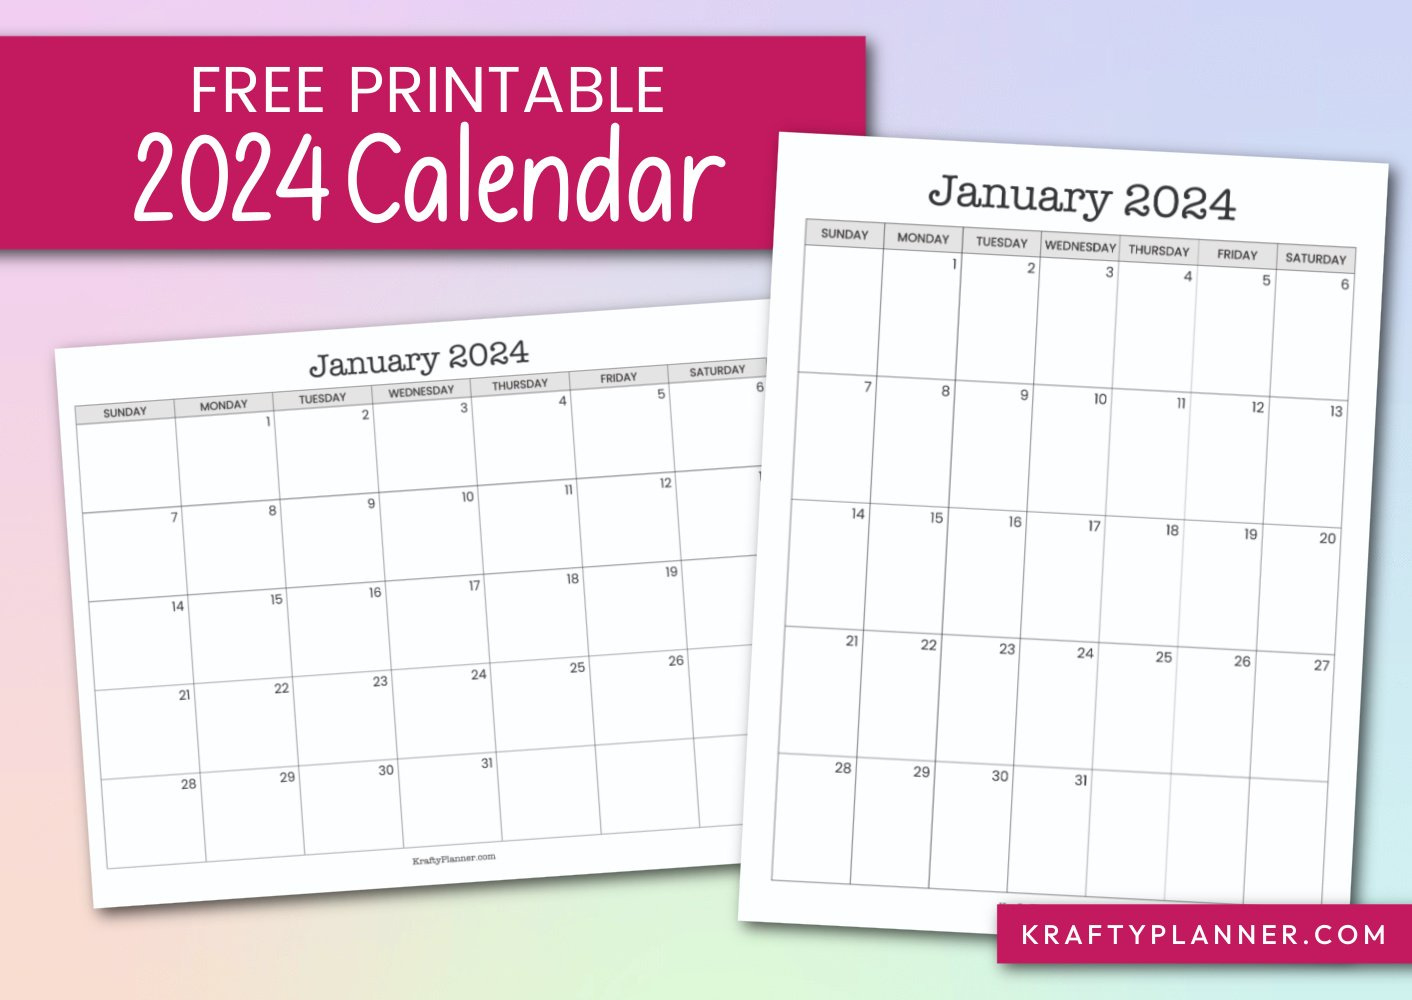 Free Printable 2024 Calendar With Notes And Task List — Krafty Planner within Free Printable Calendar 2024 With Notes